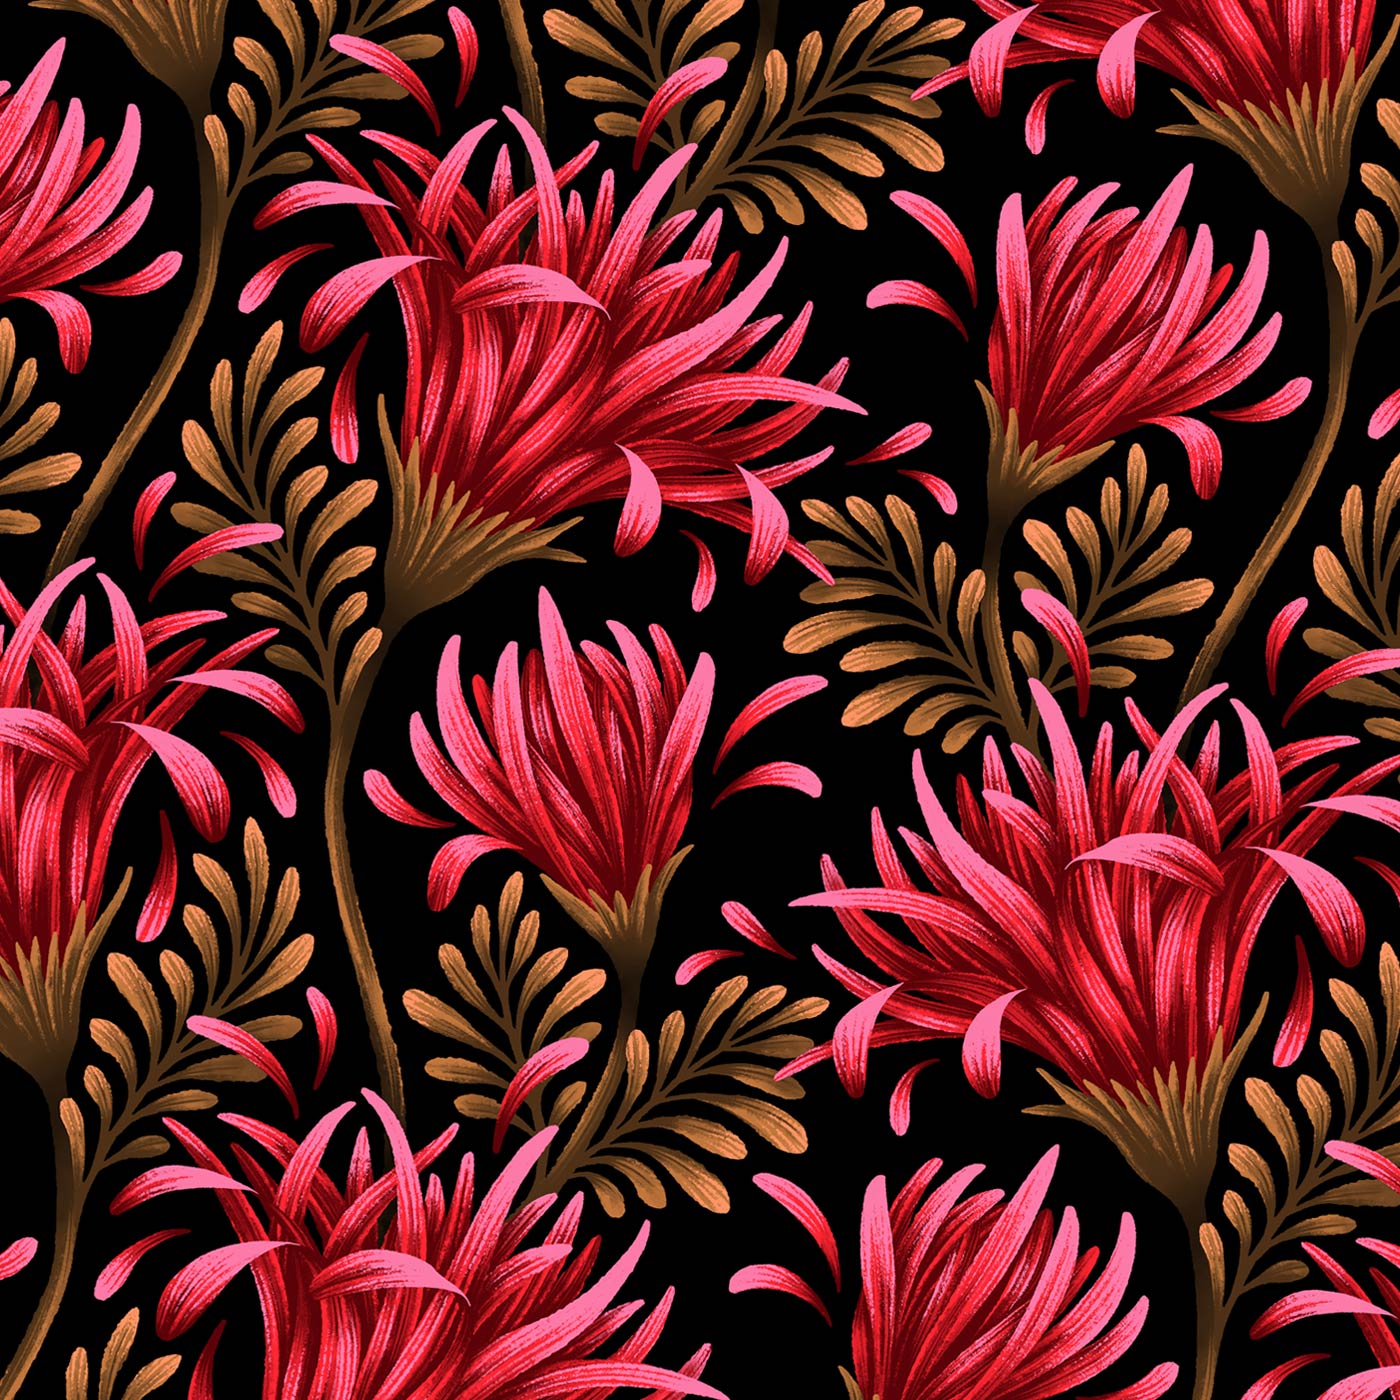 Purple daisies surface pattern repeating illustration by Andrea Muller